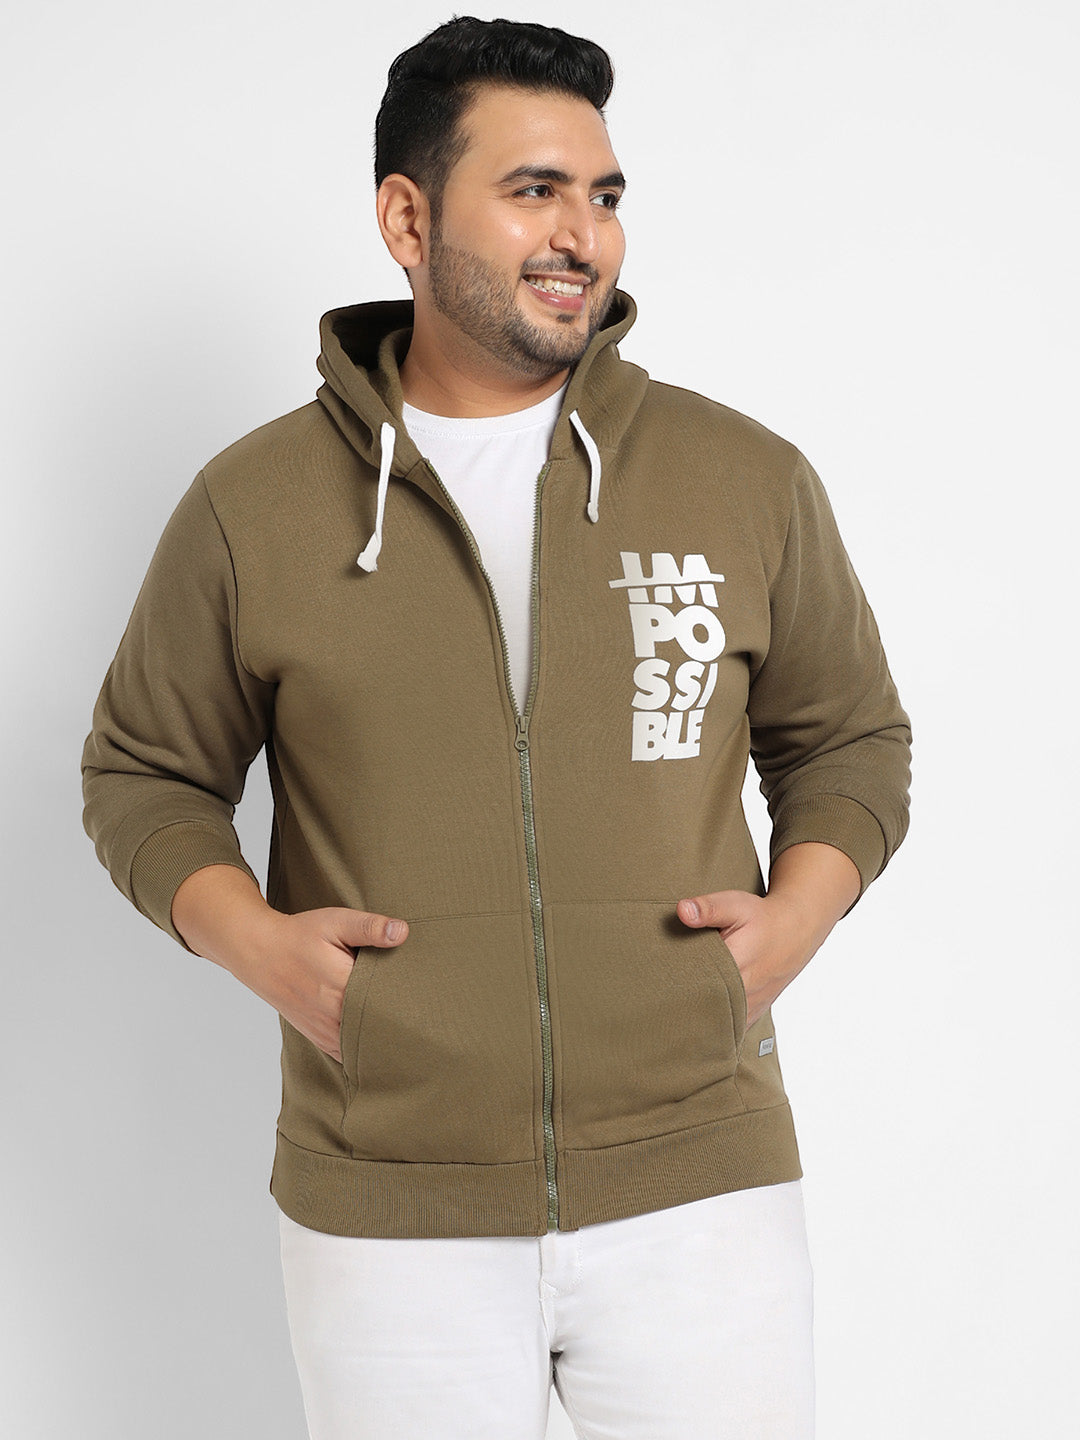 Olive Green Zip-Front Impossible Hoodie With Contrast Drawstring